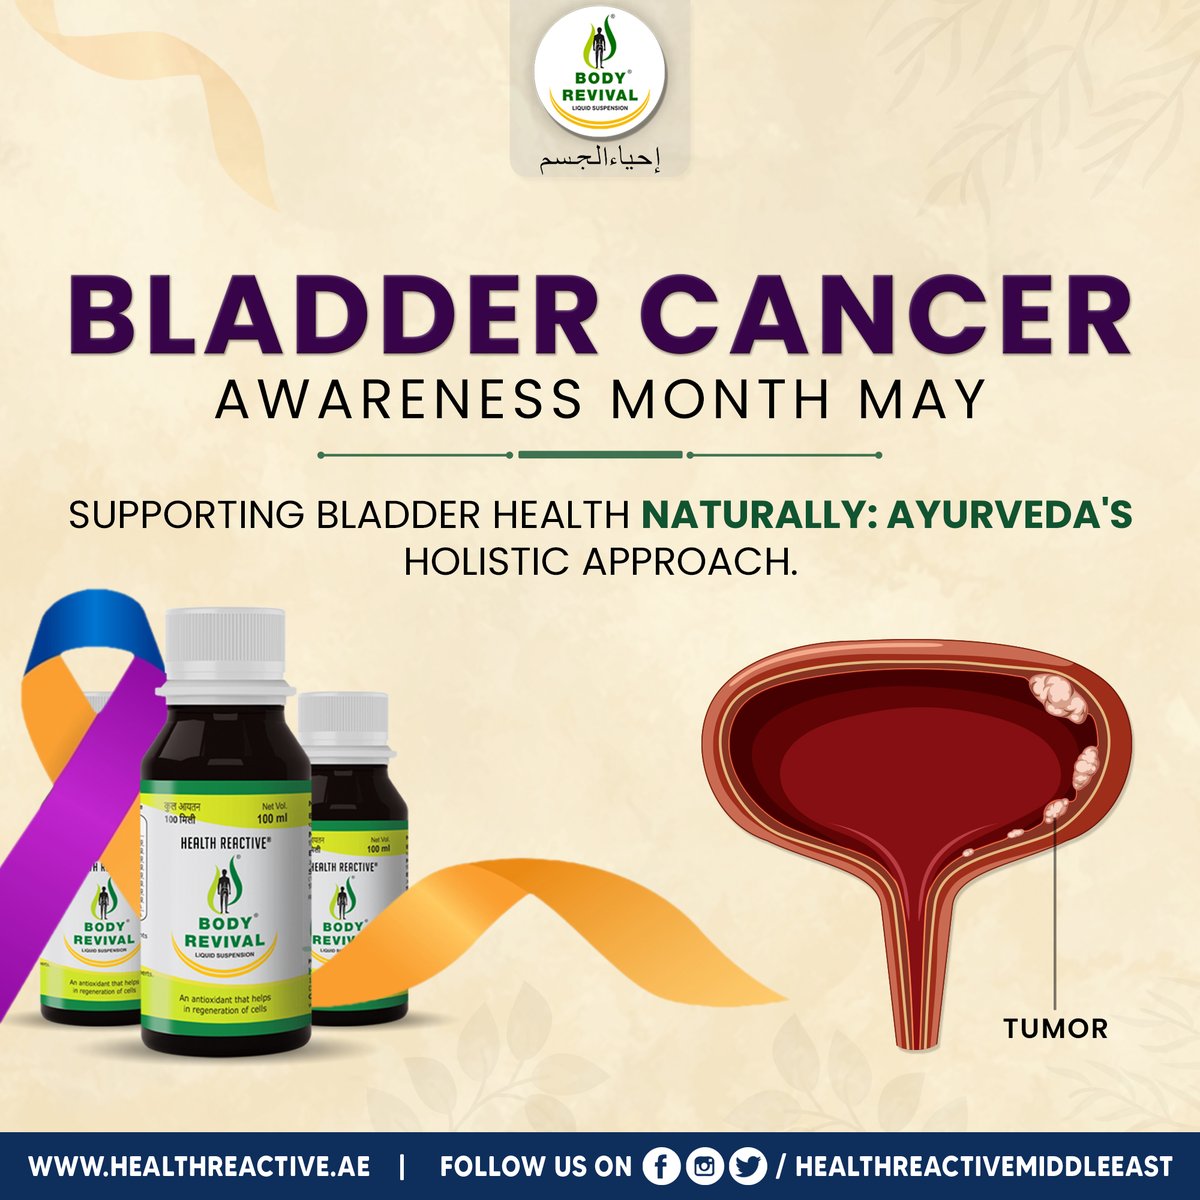 Raise bladder cancer awareness: Know the signs, get screened early, and support those affected. Together, we can make a difference in prevention.

For More Follow Us
healthreactive.com 

#immunebooster #HealthReactive #bodyrevival #DrMunirKhan
#BladderCancerAwareness